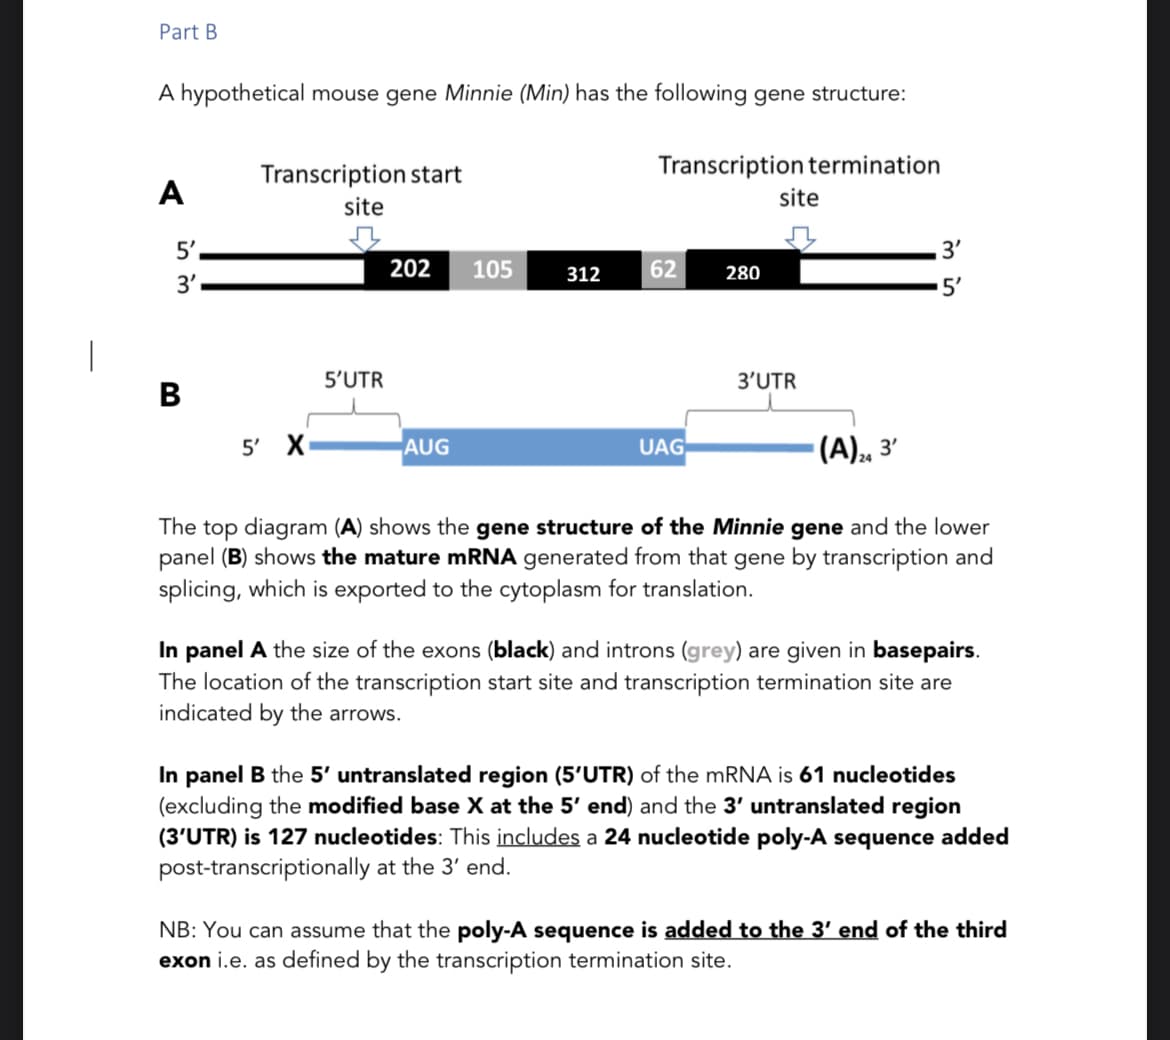 Part B
A hypothetical mouse gene Minnie (Min) has the following gene structure:
A
5',
3'
B
Transcription start
site
5' X₁
5'UTR
202 105
AUG
312
Transcription termination
62
UAG
280
site
3'UTR
3'
5'
(A) 24 3′
The top diagram (A) shows the gene structure of the Minnie gene and the lower
panel (B) shows the mature mRNA generated from that gene by transcription and
splicing, which is exported to the cytoplasm for translation.
In panel A the size of the exons (black) and introns (grey) are given in basepairs.
The location of the transcription start site and transcription termination site are
indicated by the arrows.
In panel B the 5' untranslated region (5'UTR) of the mRNA is 61 nucleotides
(excluding the modified base X at the 5' end) and the 3' untranslated region
(3′UTR) is 127 nucleotides: This includes a 24 nucleotide poly-A sequence added
post-transcriptionally at the 3' end.
NB: You can assume that the poly-A sequence is added to the 3′ end of the third
exon i.e. as defined by the transcription termination site.